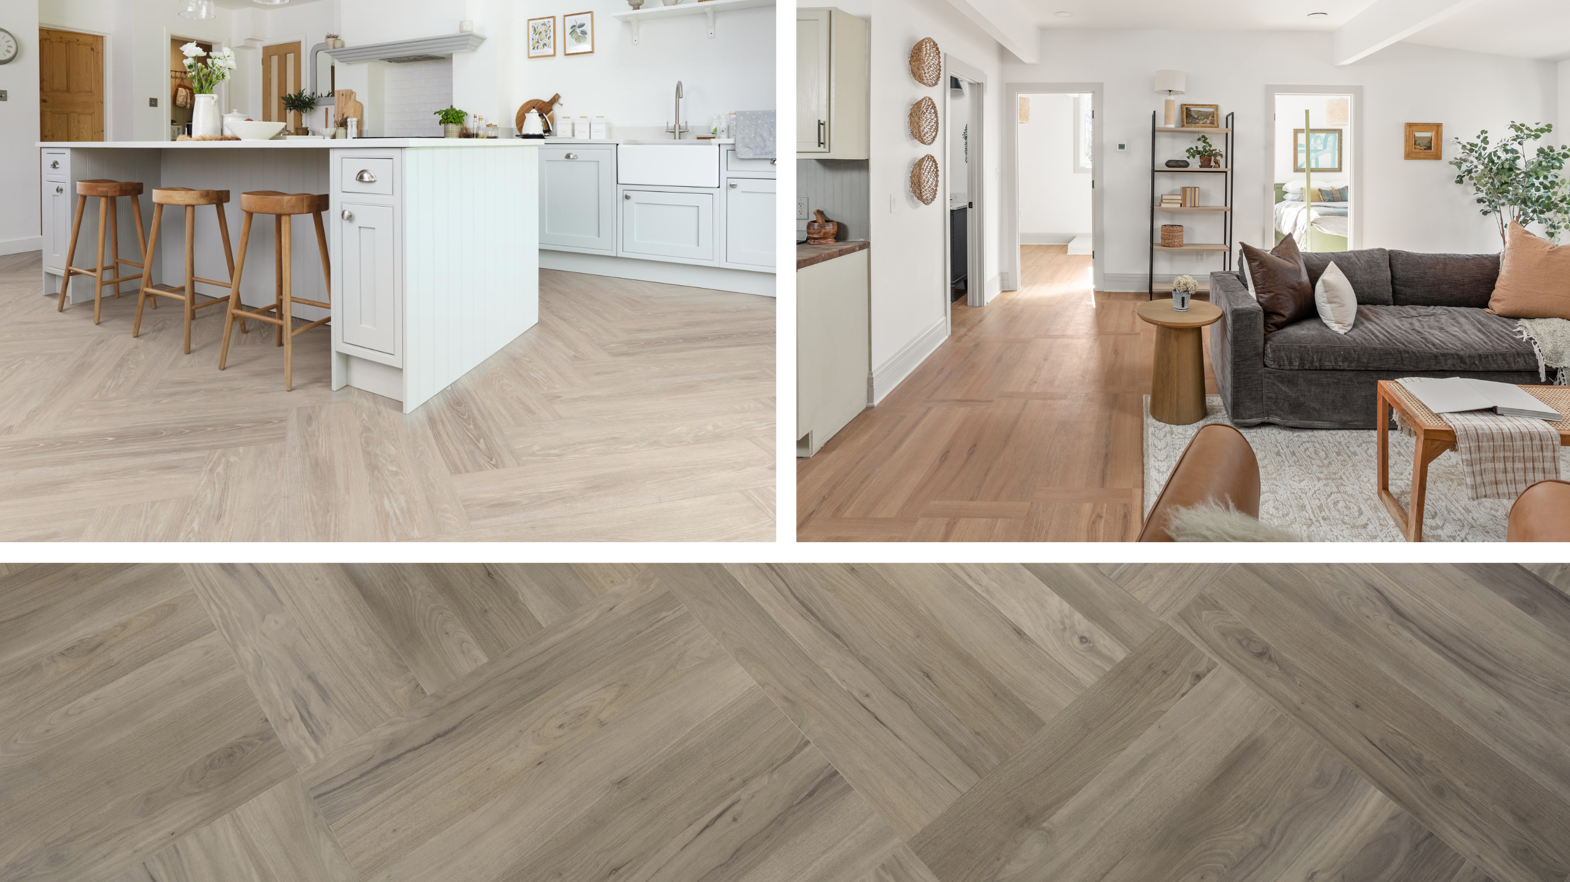 Top Left: Kitchen with Ashland LLP95 in a herringbone pattern; Top Right: Mina's basket weave pattern in a living room; Bottom: Bleached Grey Walnut WP329 in a block pattern